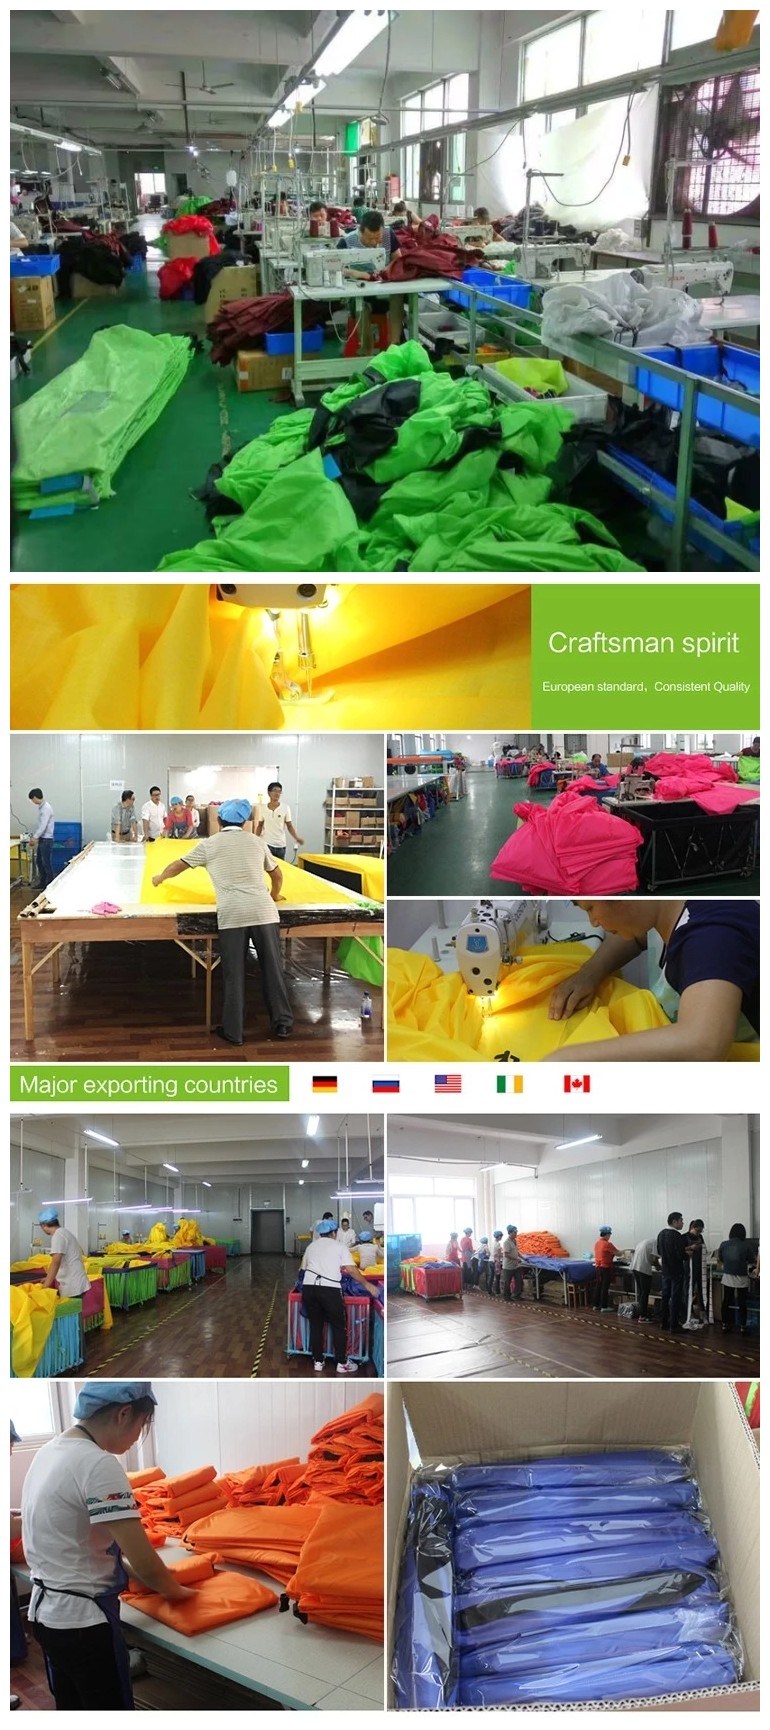 Wholesale Inflatable Sofa Air Bed Lazy Sofa